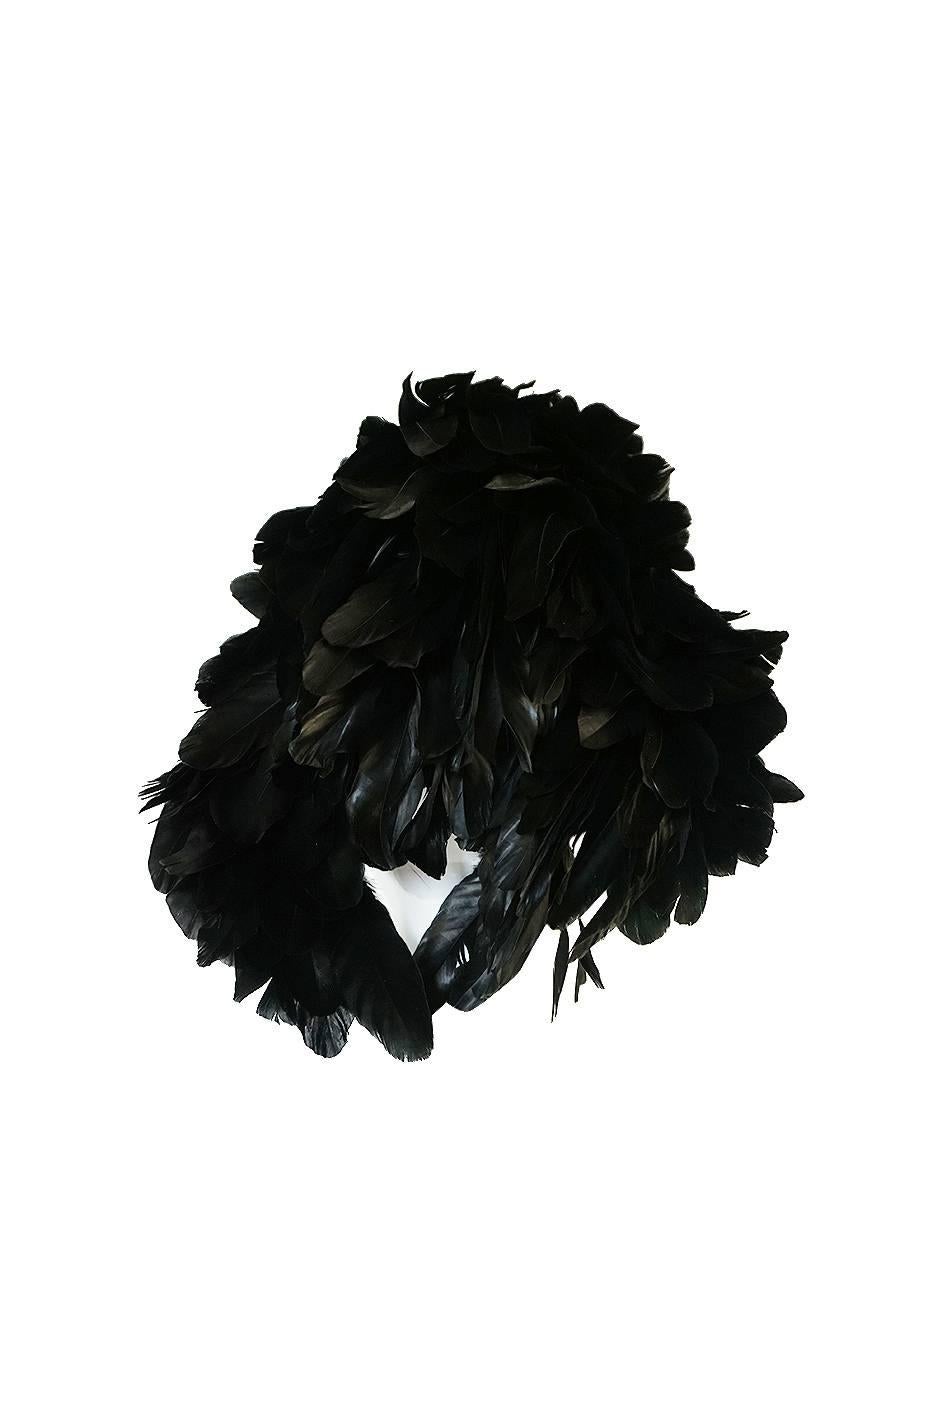 This hat is such a statement piece and so bold. It is made of a glossy, iridescent black feathers that are all set to sweep back front he front and give it that wonderful fullness. It is almost like a hood and the effect is marvelous. It is